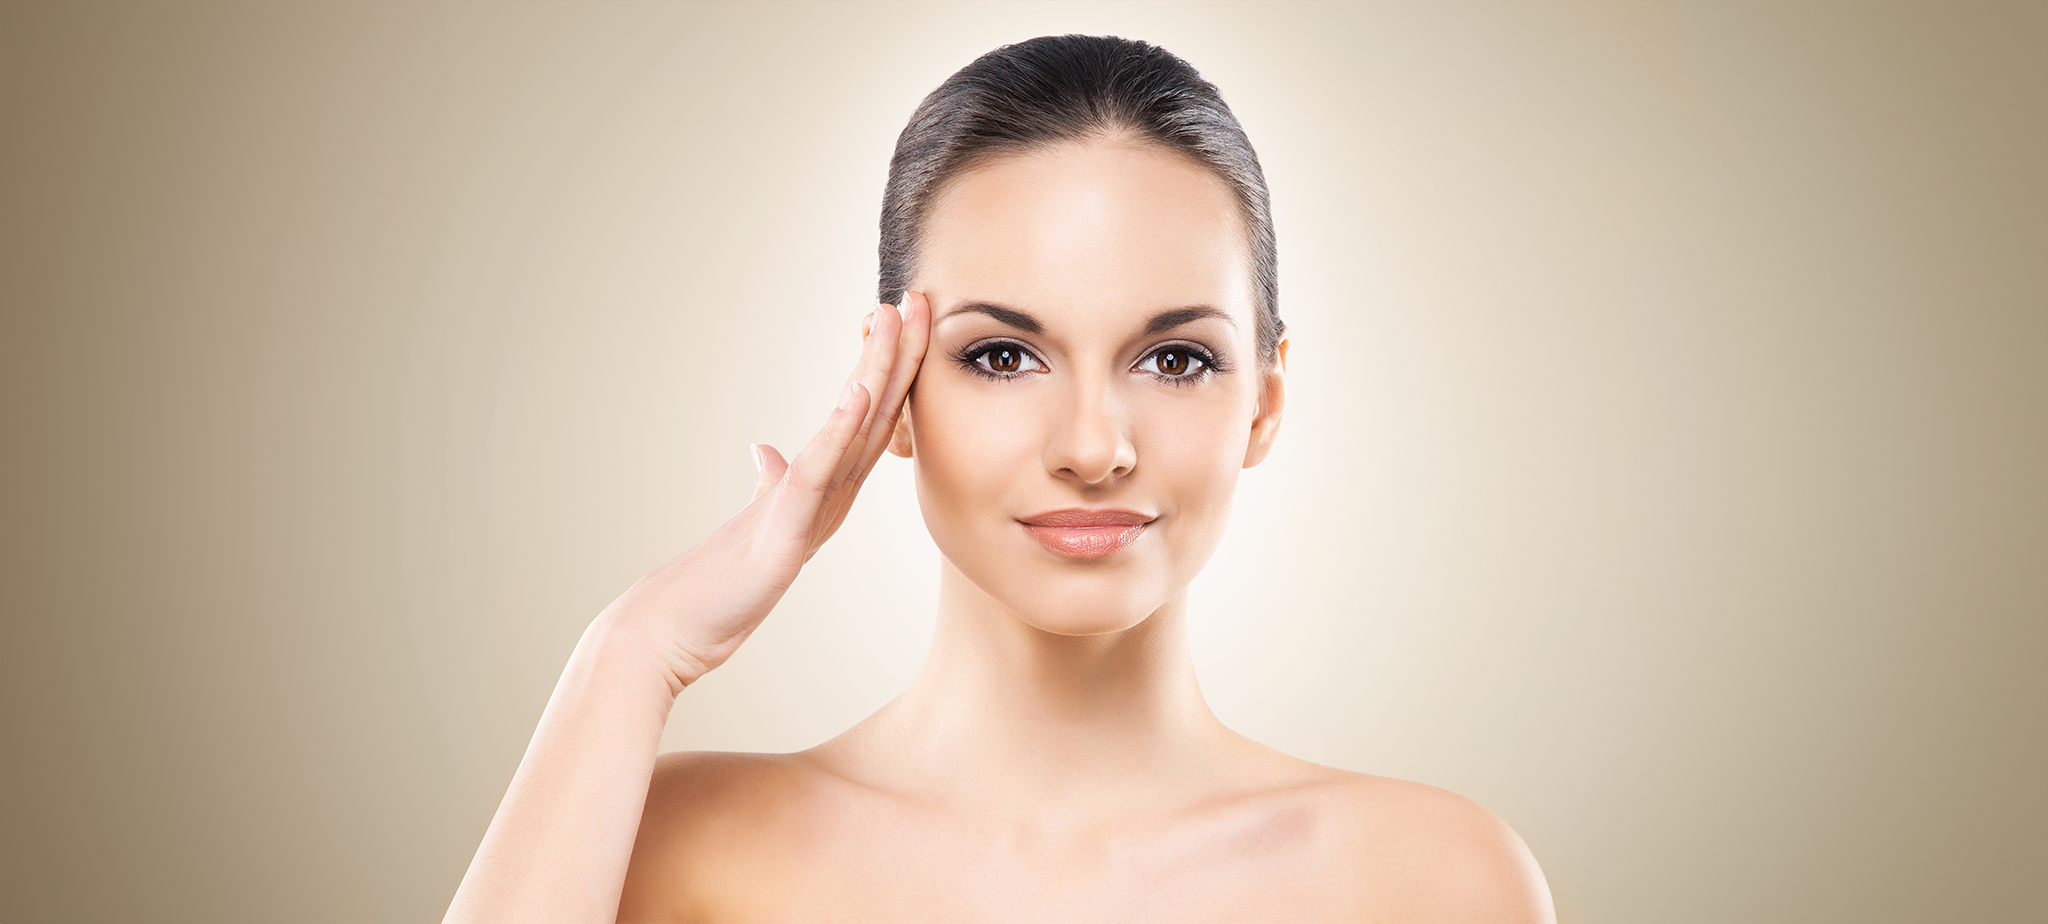 Facelift or Injectables